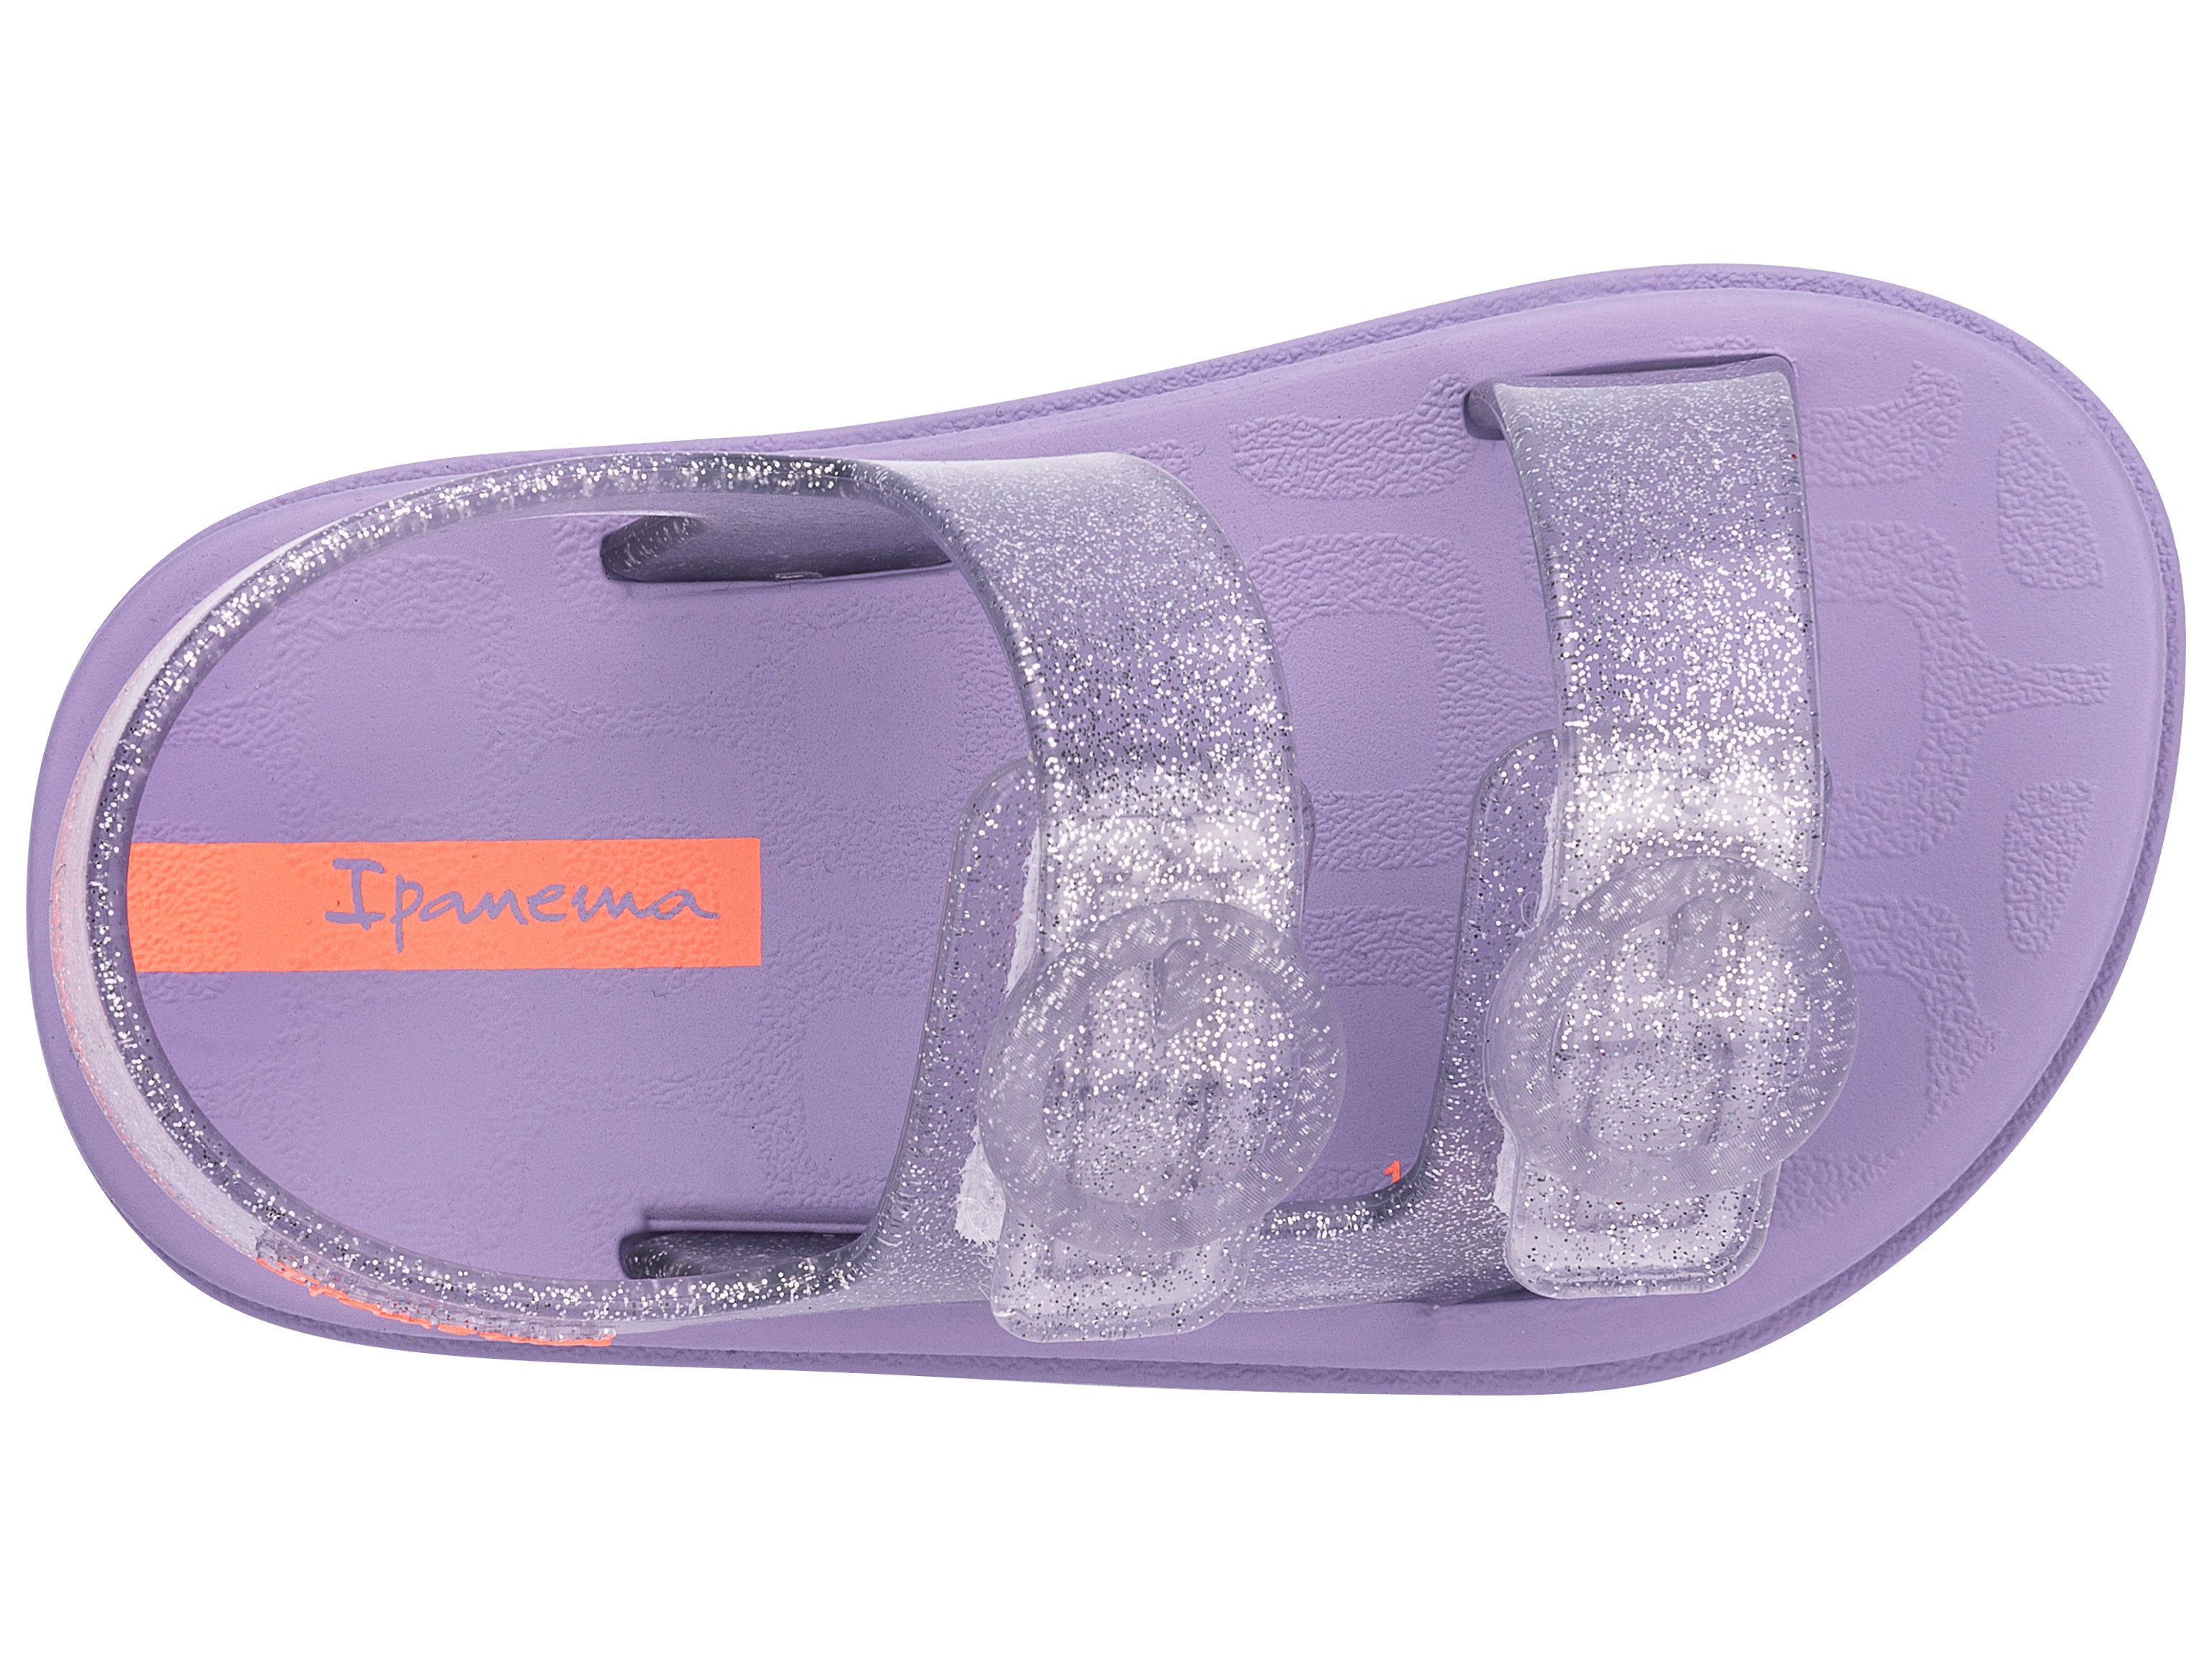 Top view of a purple Ipanema Follow baby sandal with two decorative buckles on the upper.